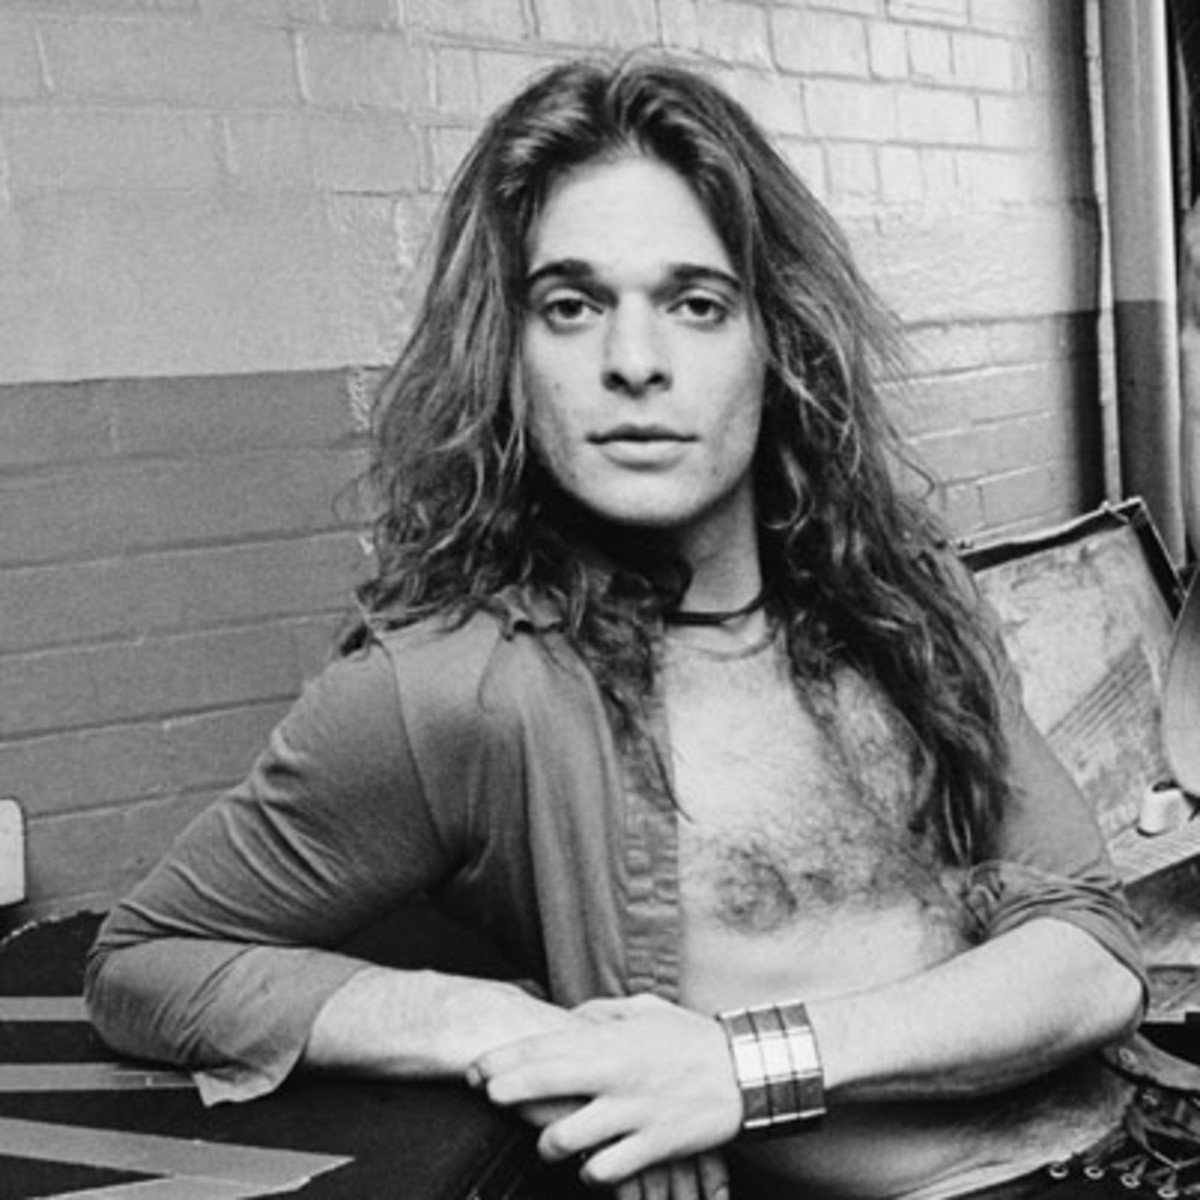 Happy Birthday to Van Halen singer songwriter David Lee Roth, born on this day in Bloomington, Indiana in 1954.   